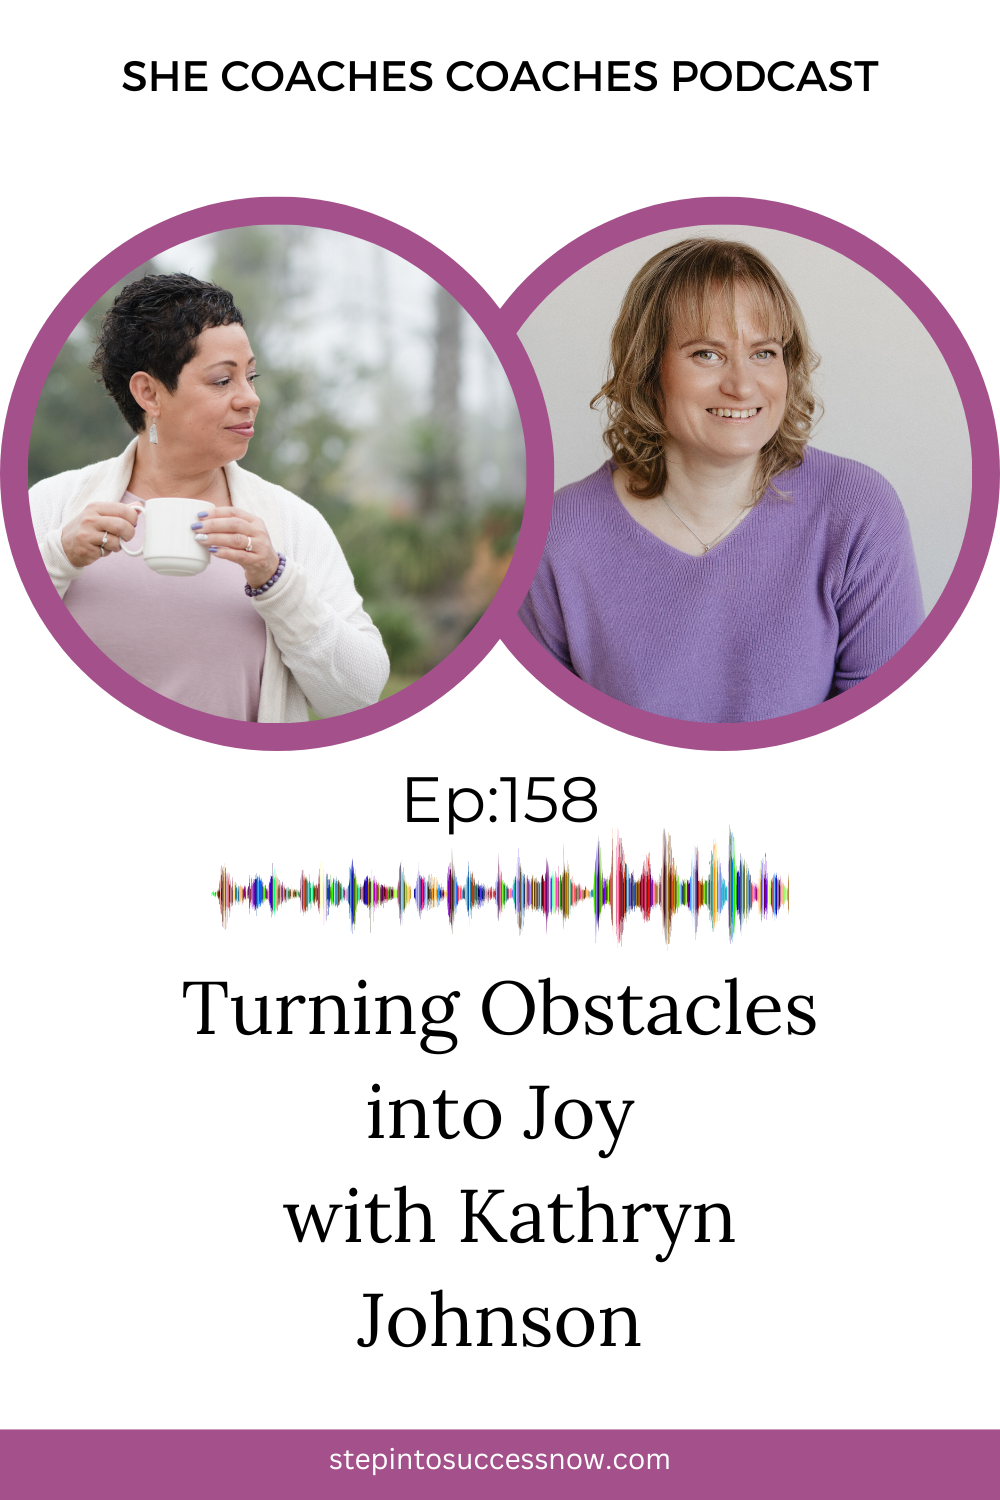 Turning Obstacles into Joy: A Spiritual and Business Coaching Philosophy with Kathryn Johnson Ep-158